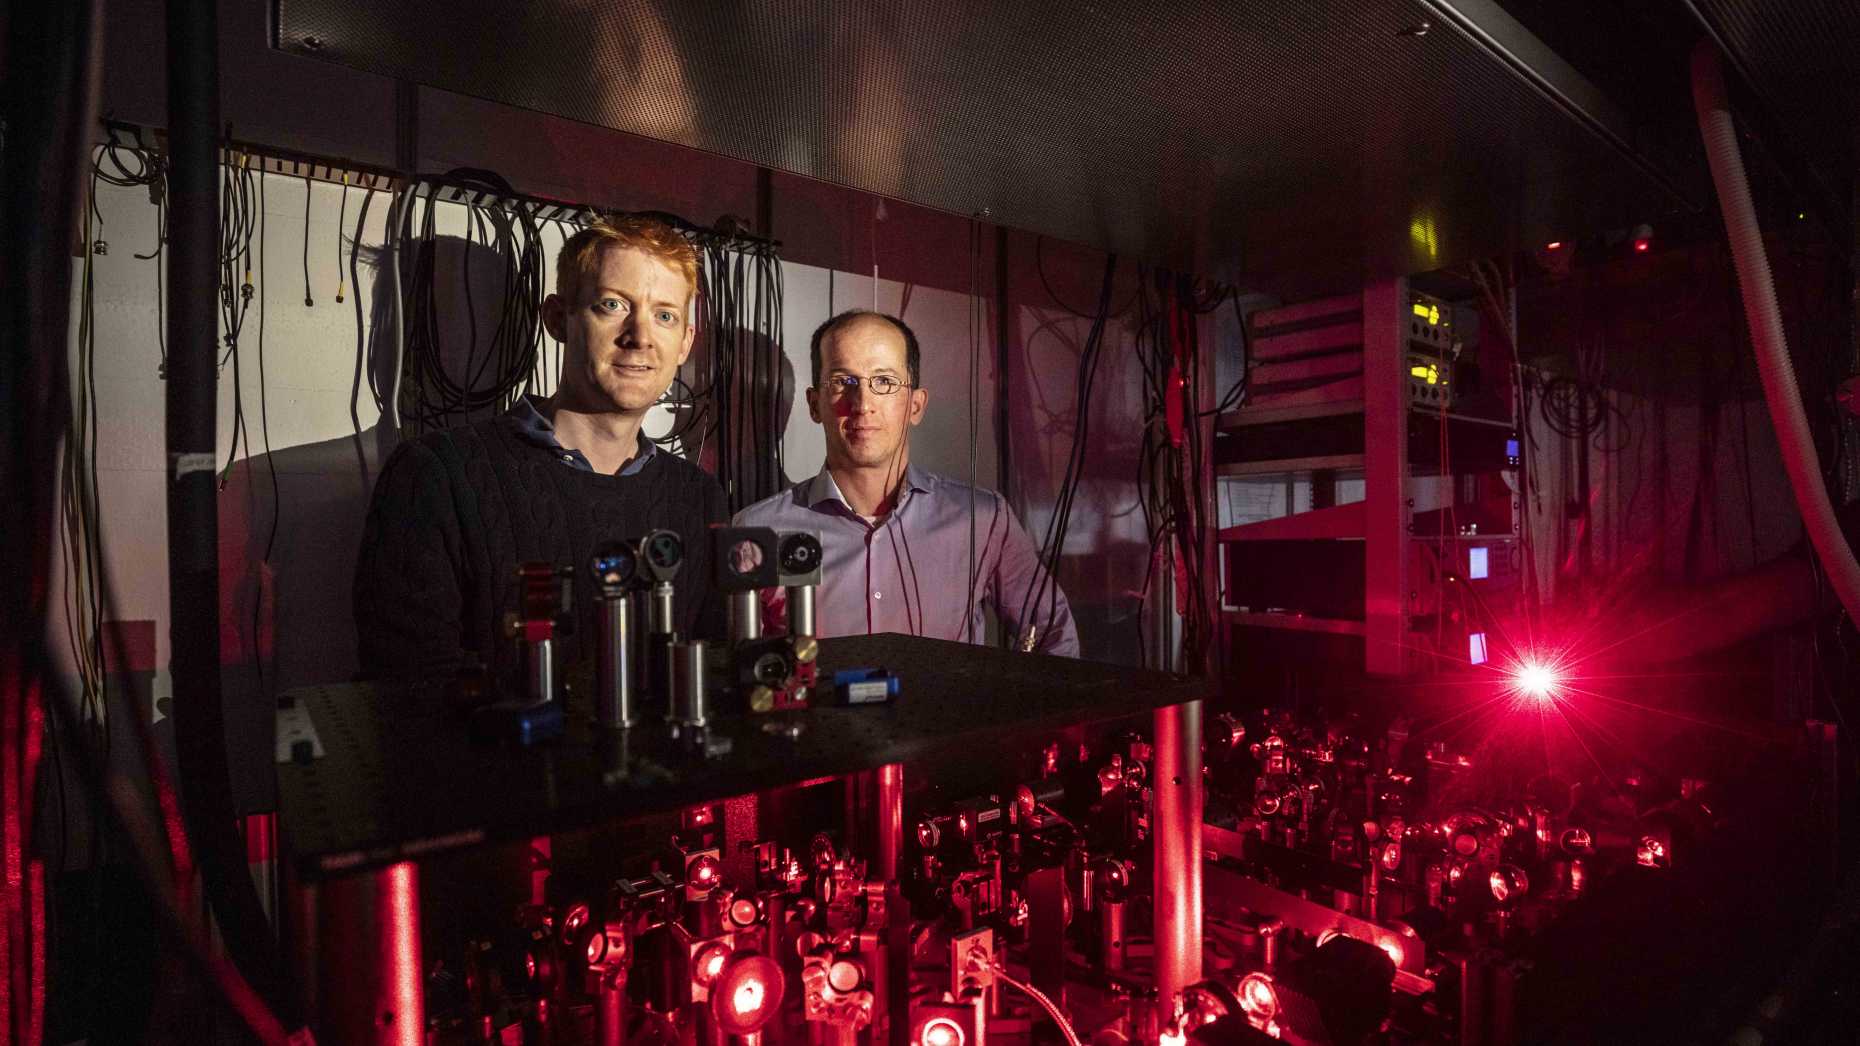 Two men stand behind Qubits. The image is dominated by red light. 